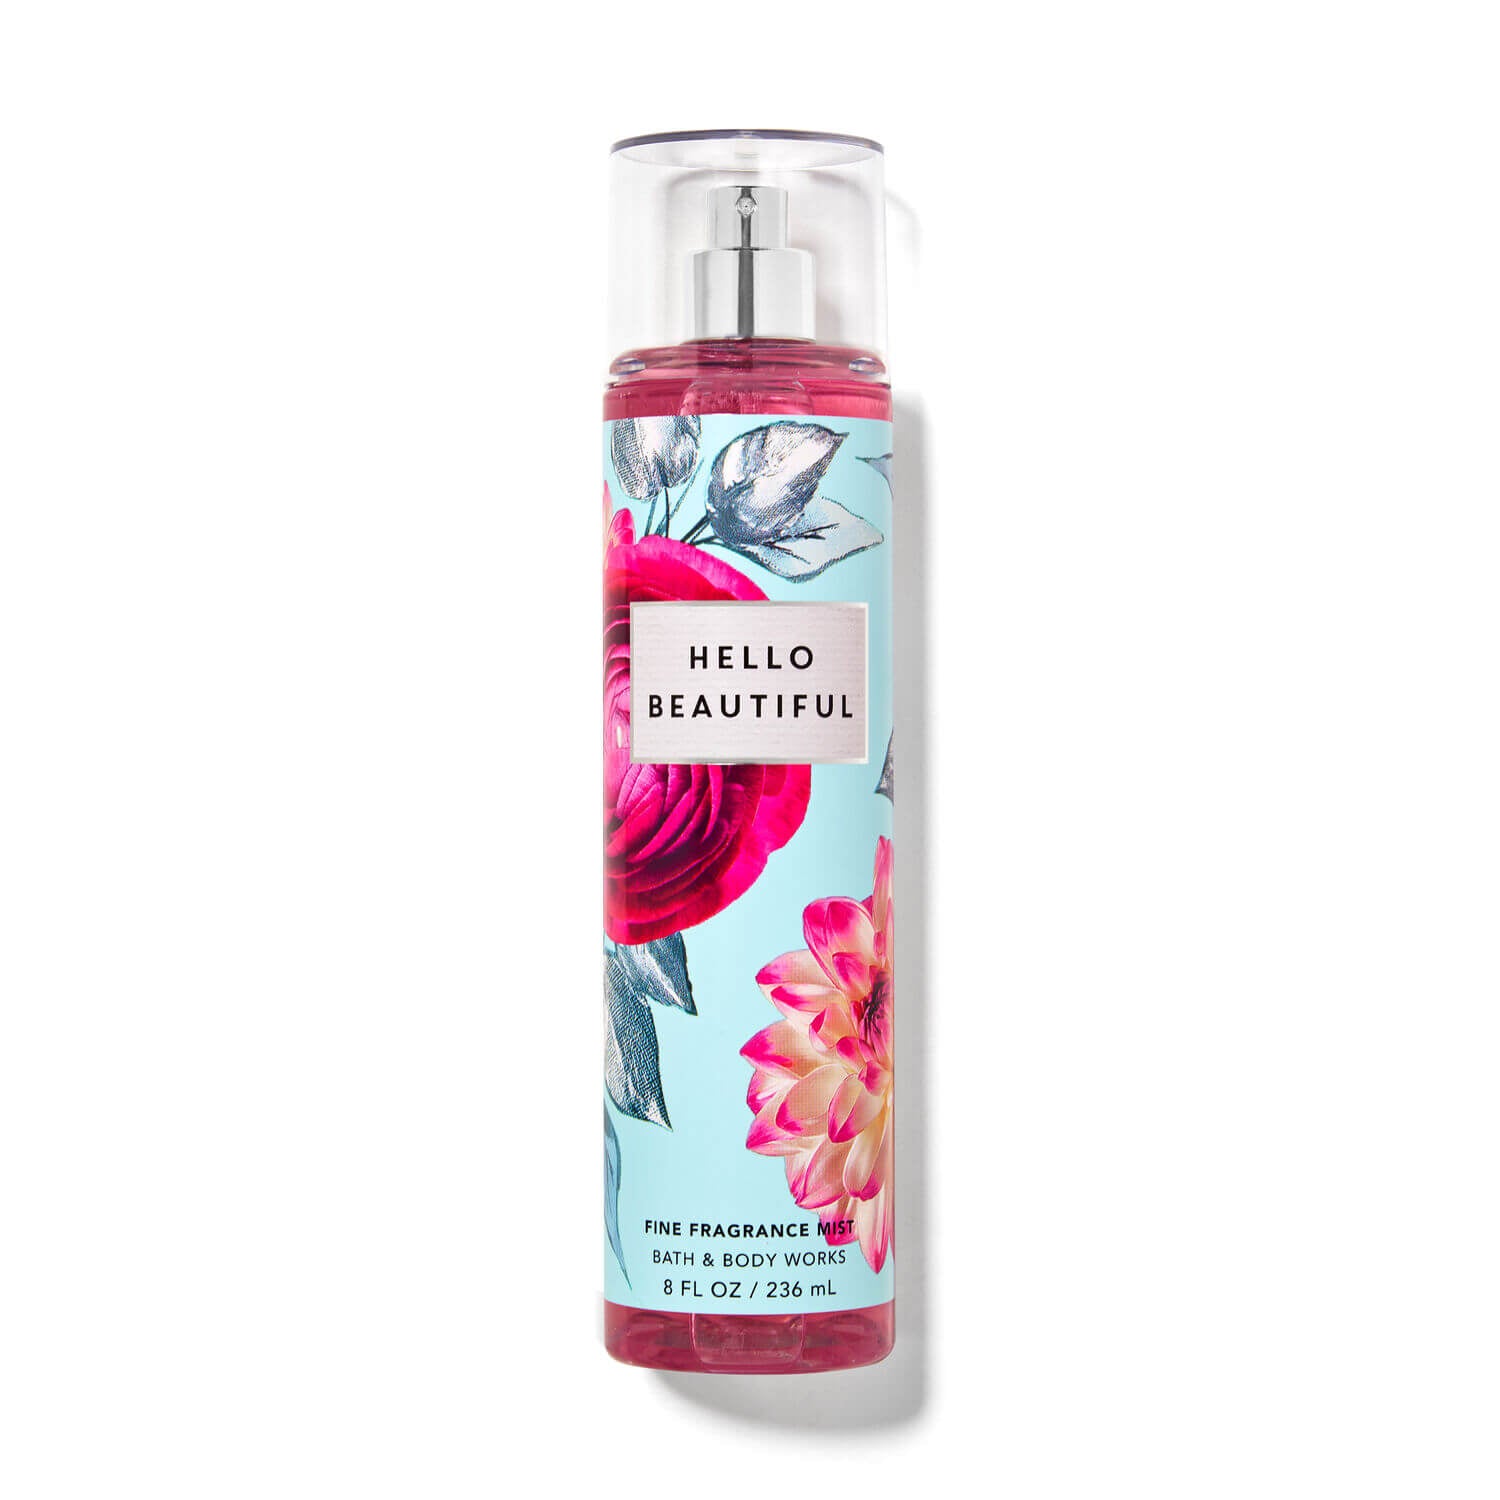 Shop 100% original Bath and Body Works mist in Hello Beautiful fragrance available at Heygirl.pk for delivery in Pakistan